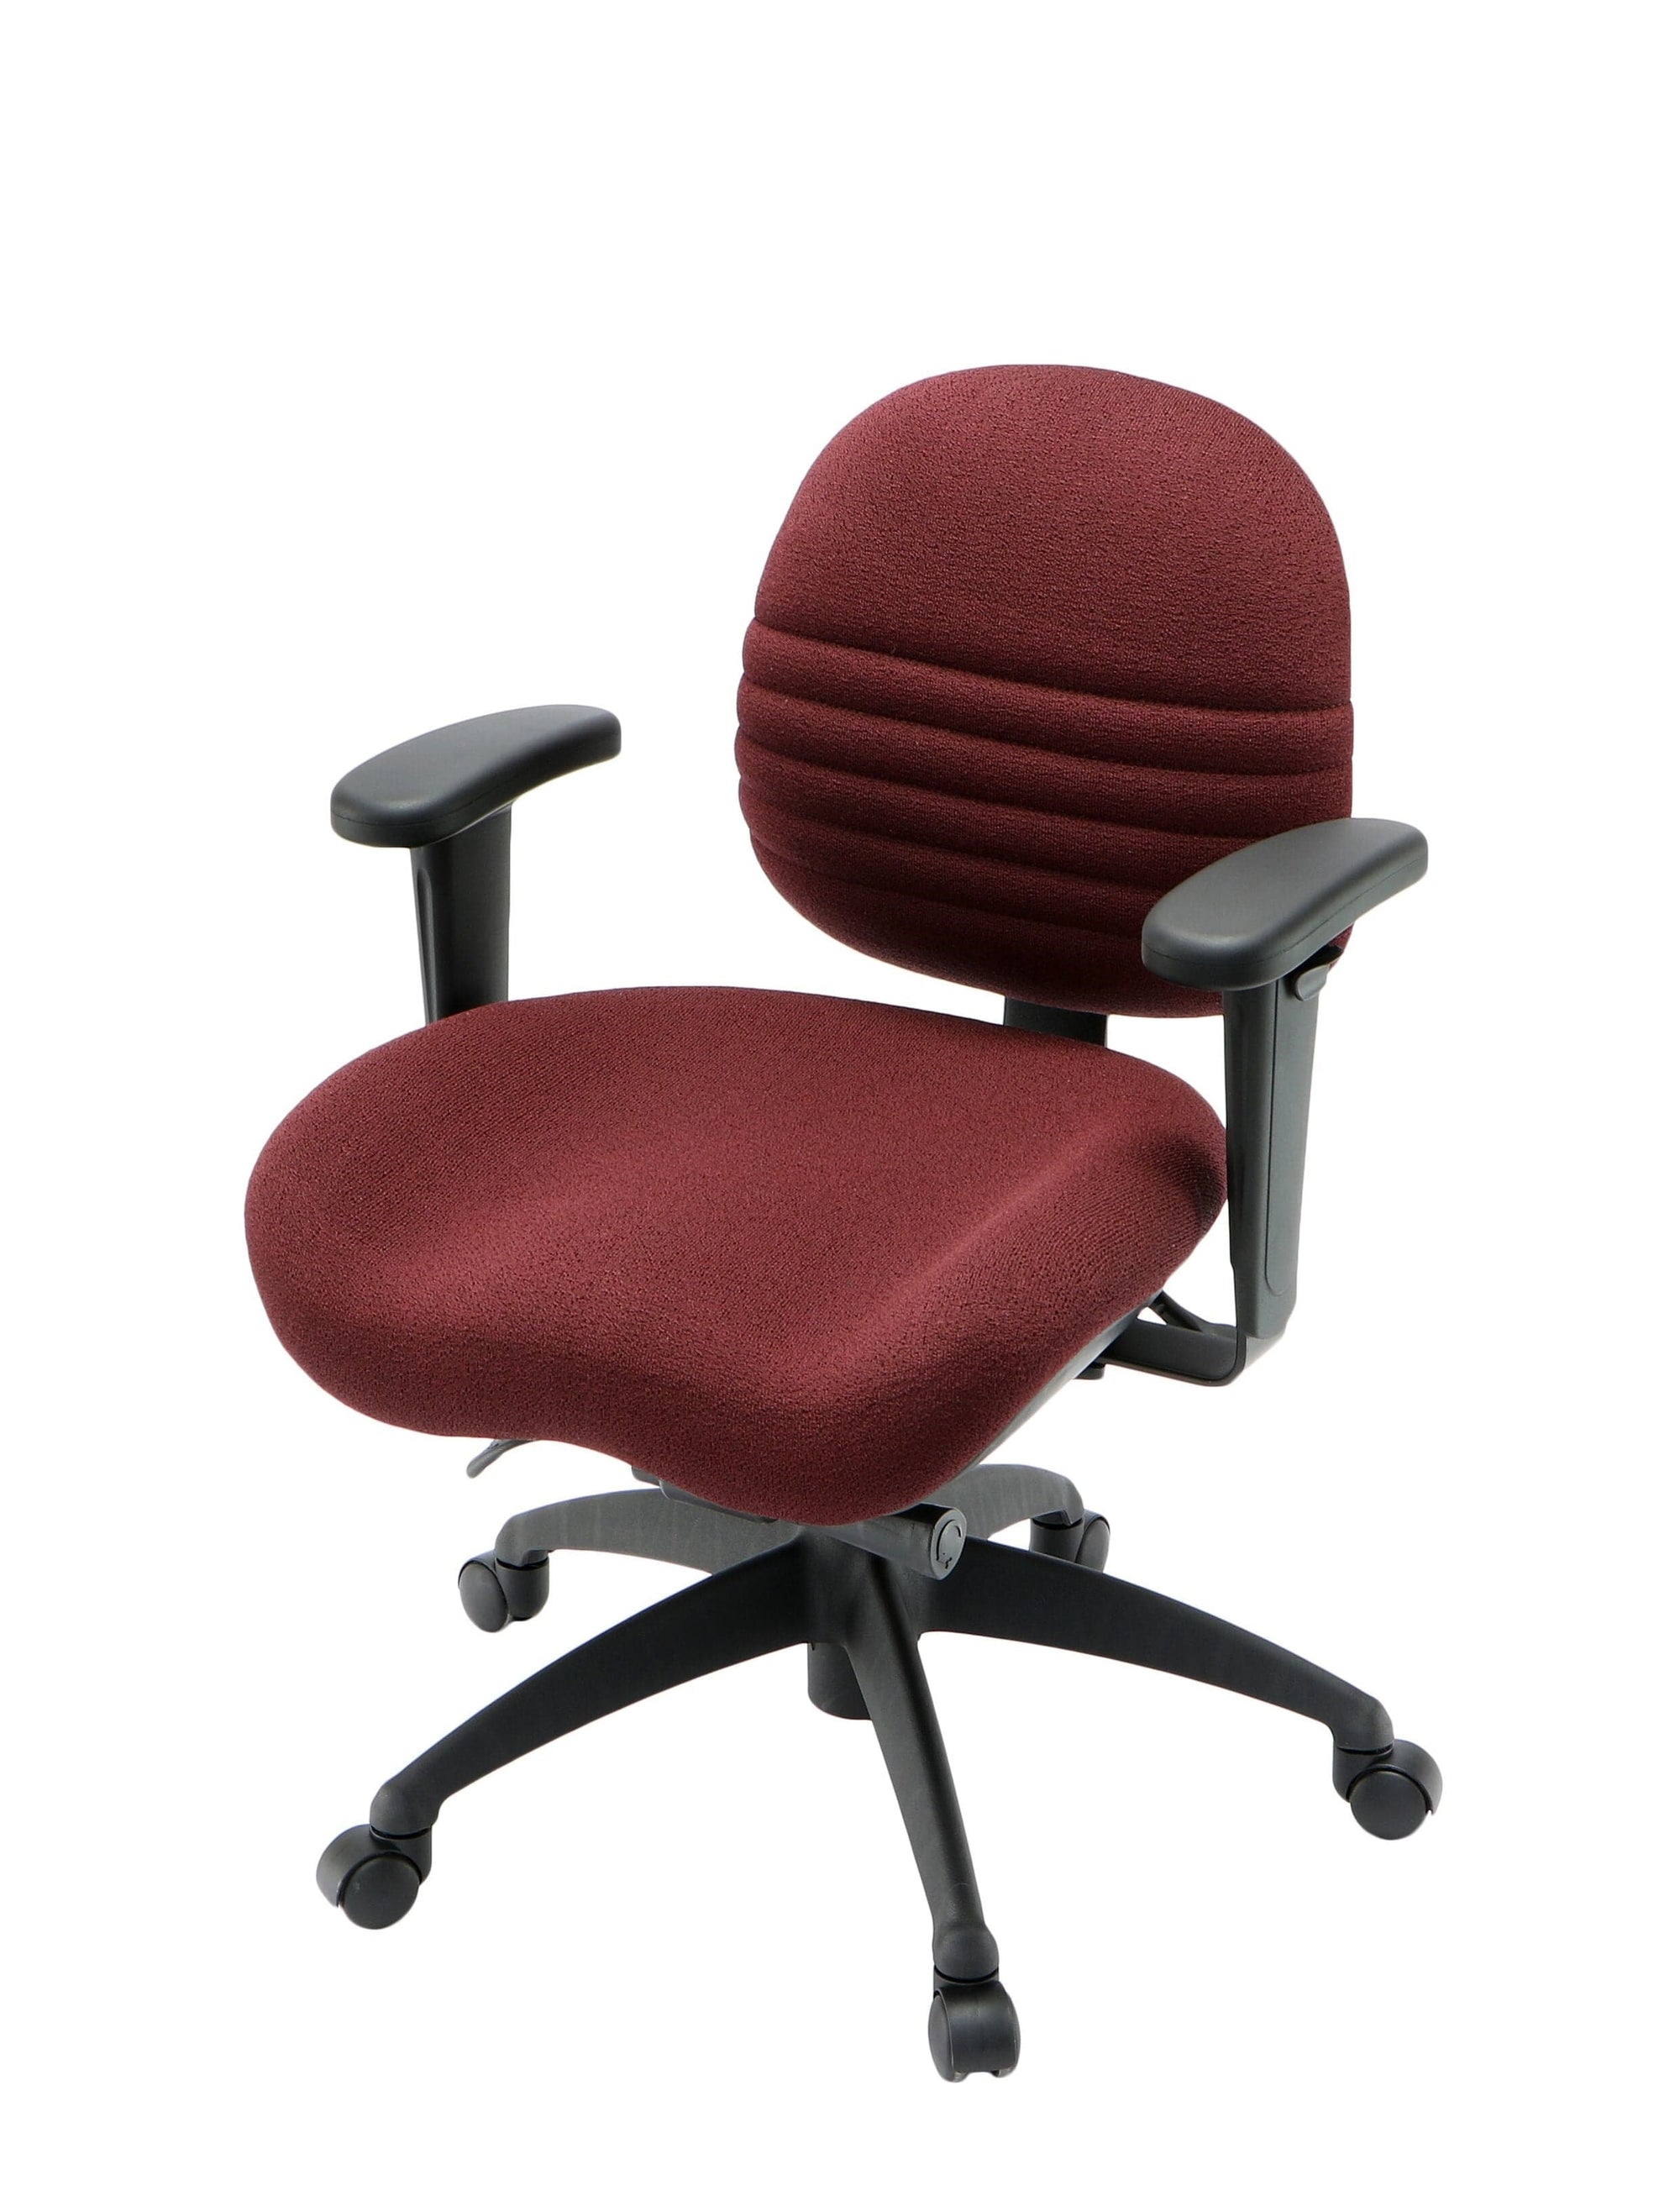 Lifeform Adjustable Contour Task Chair Relax The Back